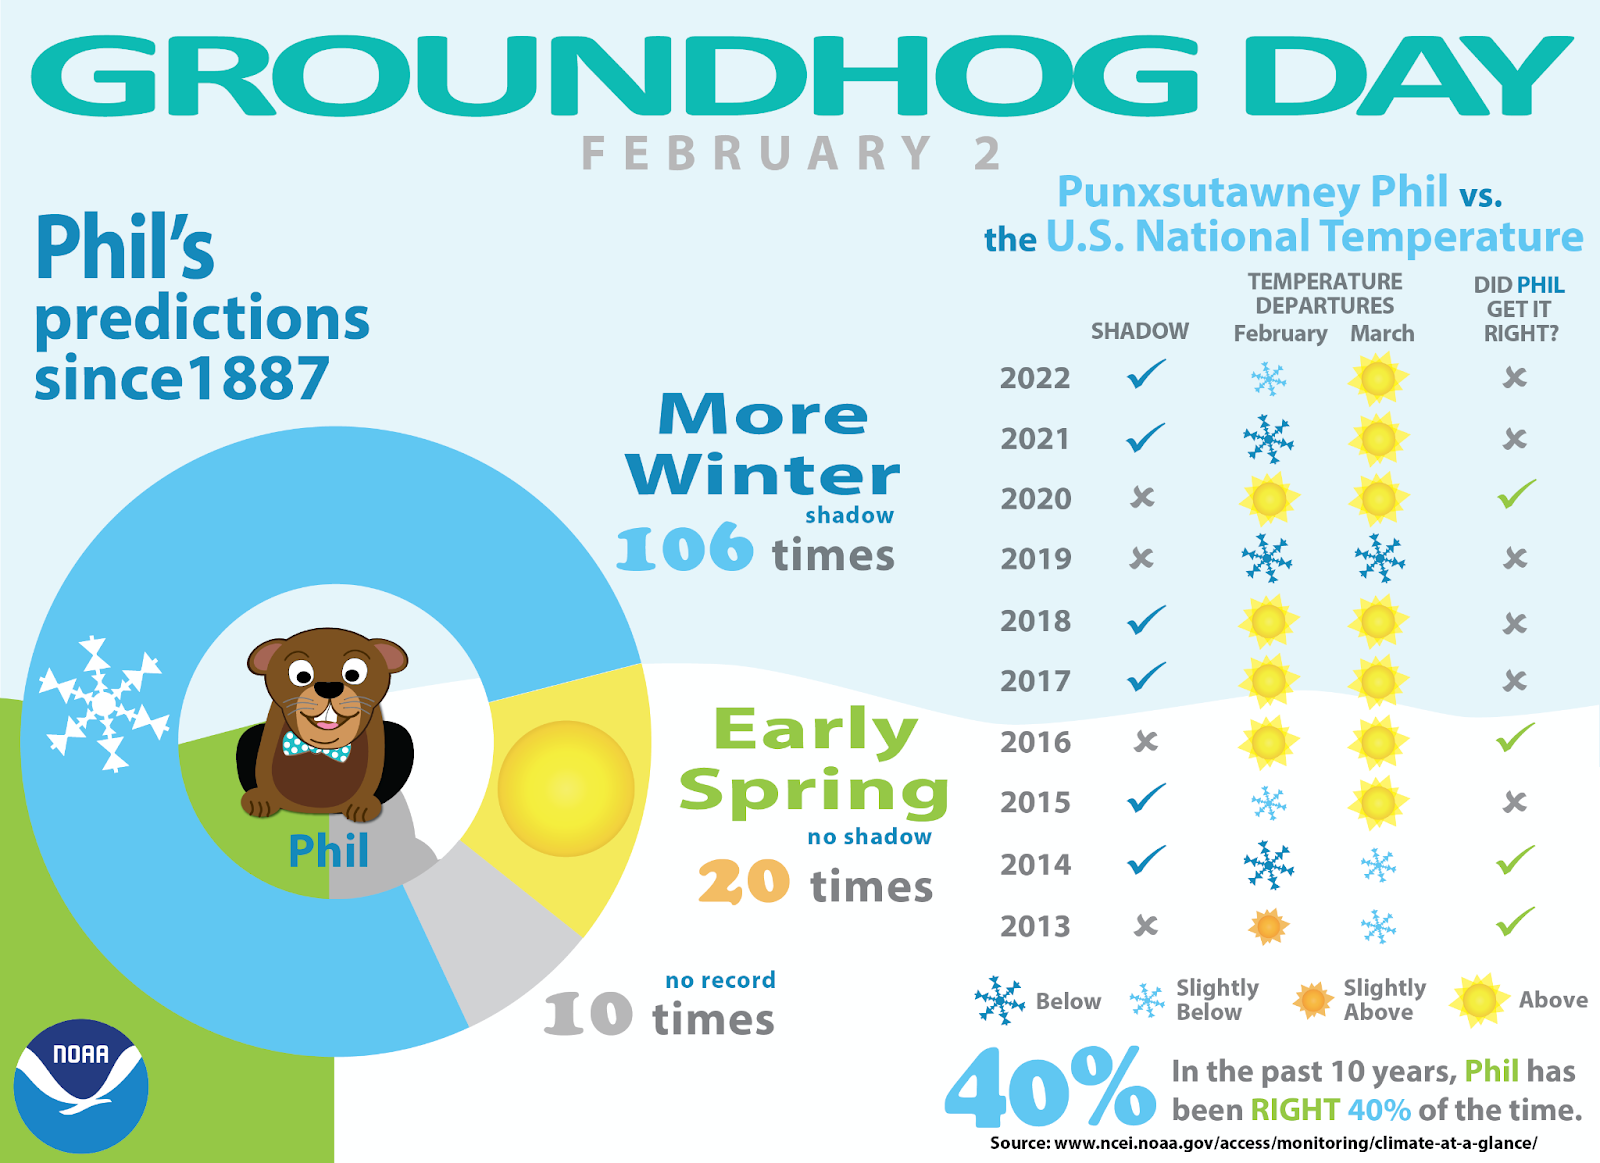 Infographic showing an illustrated groundhog with a table showing the spring predictions made by “Punxsutawney Phil” versus U.S. temperature departures from average from the NOAA U.S. Climate report from 2013-2022.